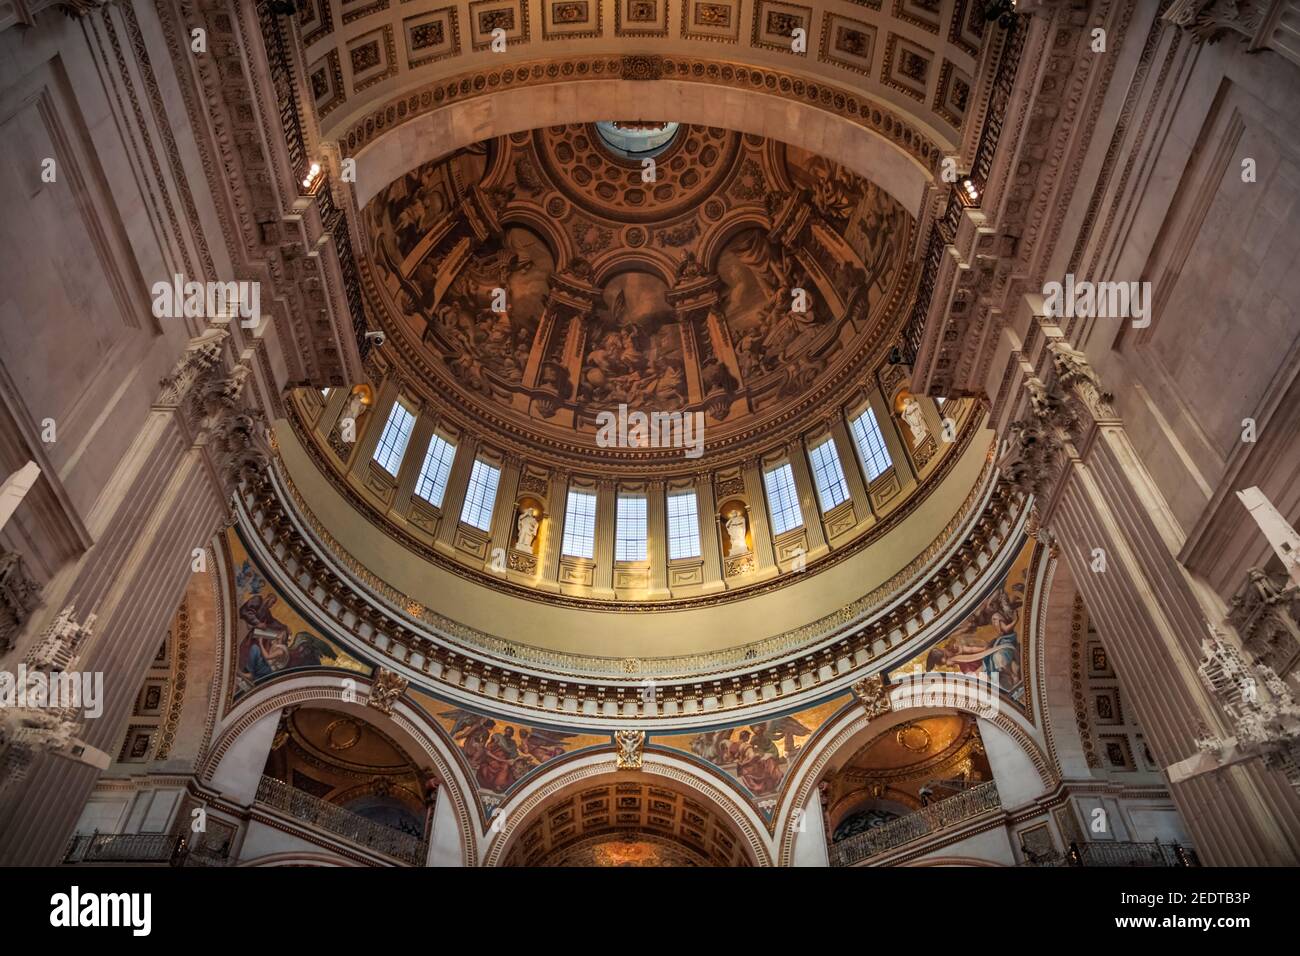 St Paul's Cathedral interior, view up to ceiling murals, paintings, mosaics, nd gilded decorations, inner dome, London, England Stock Photo